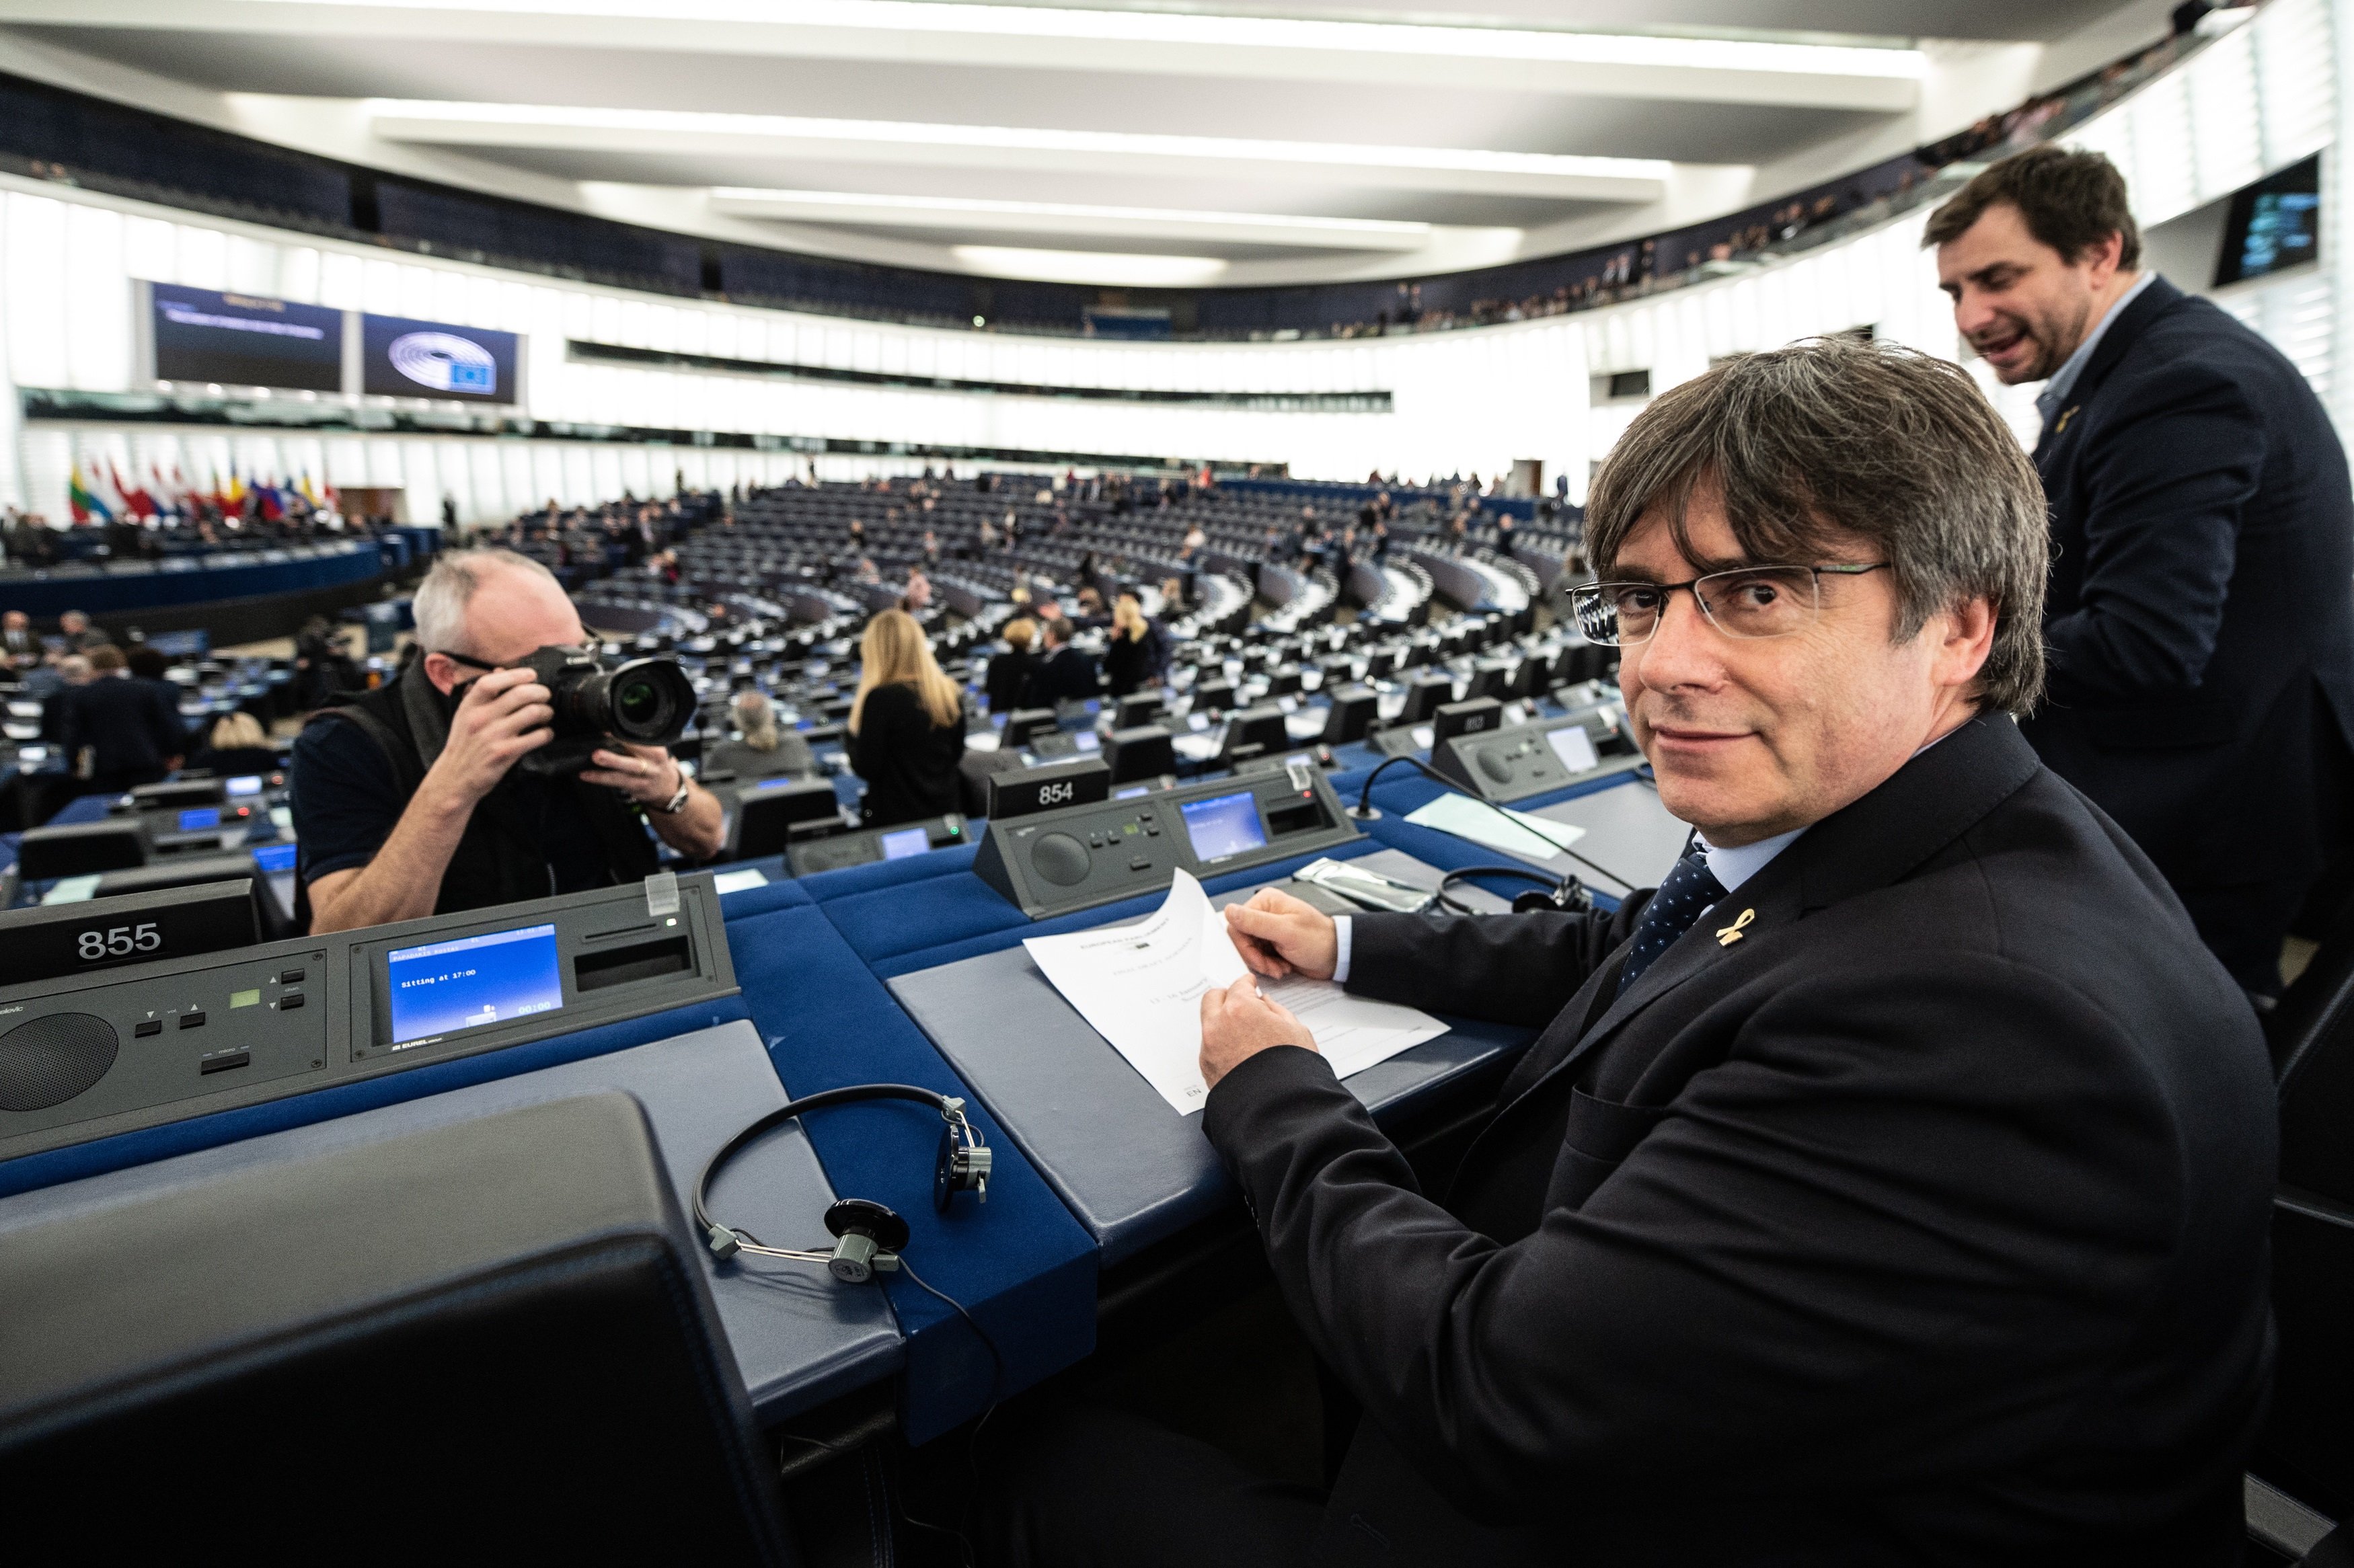 Puigdemont on Spanish request he lose MEP immunity: "We know what we have to do"